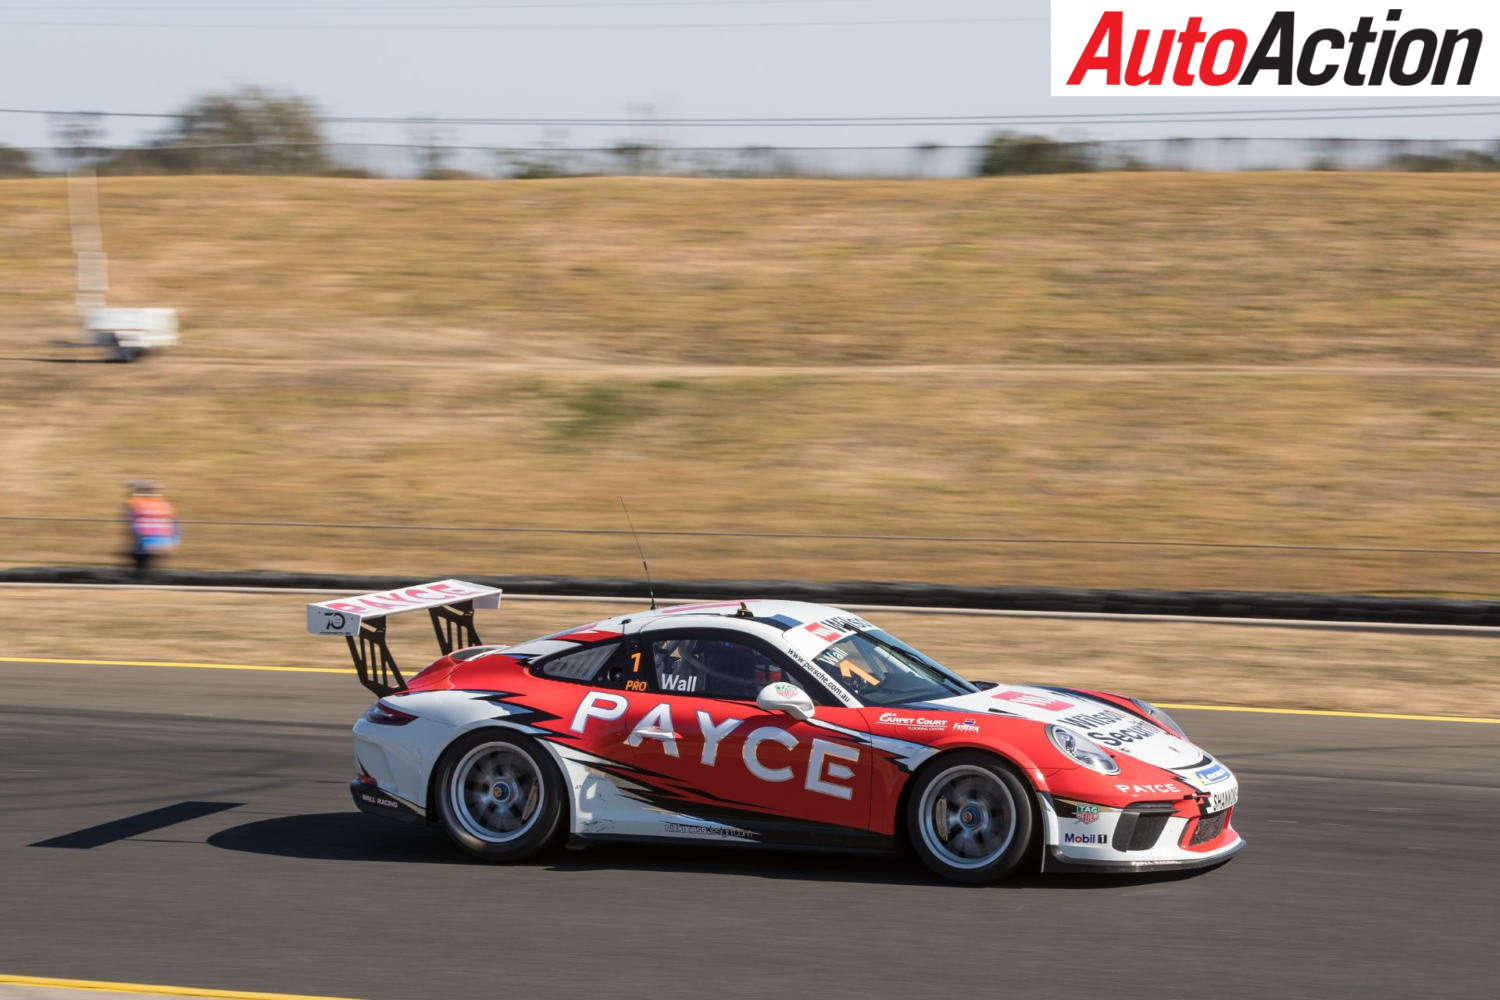 PAYCE takes over Porsche Carrera Cup title partnership - Photo: InSyde Media